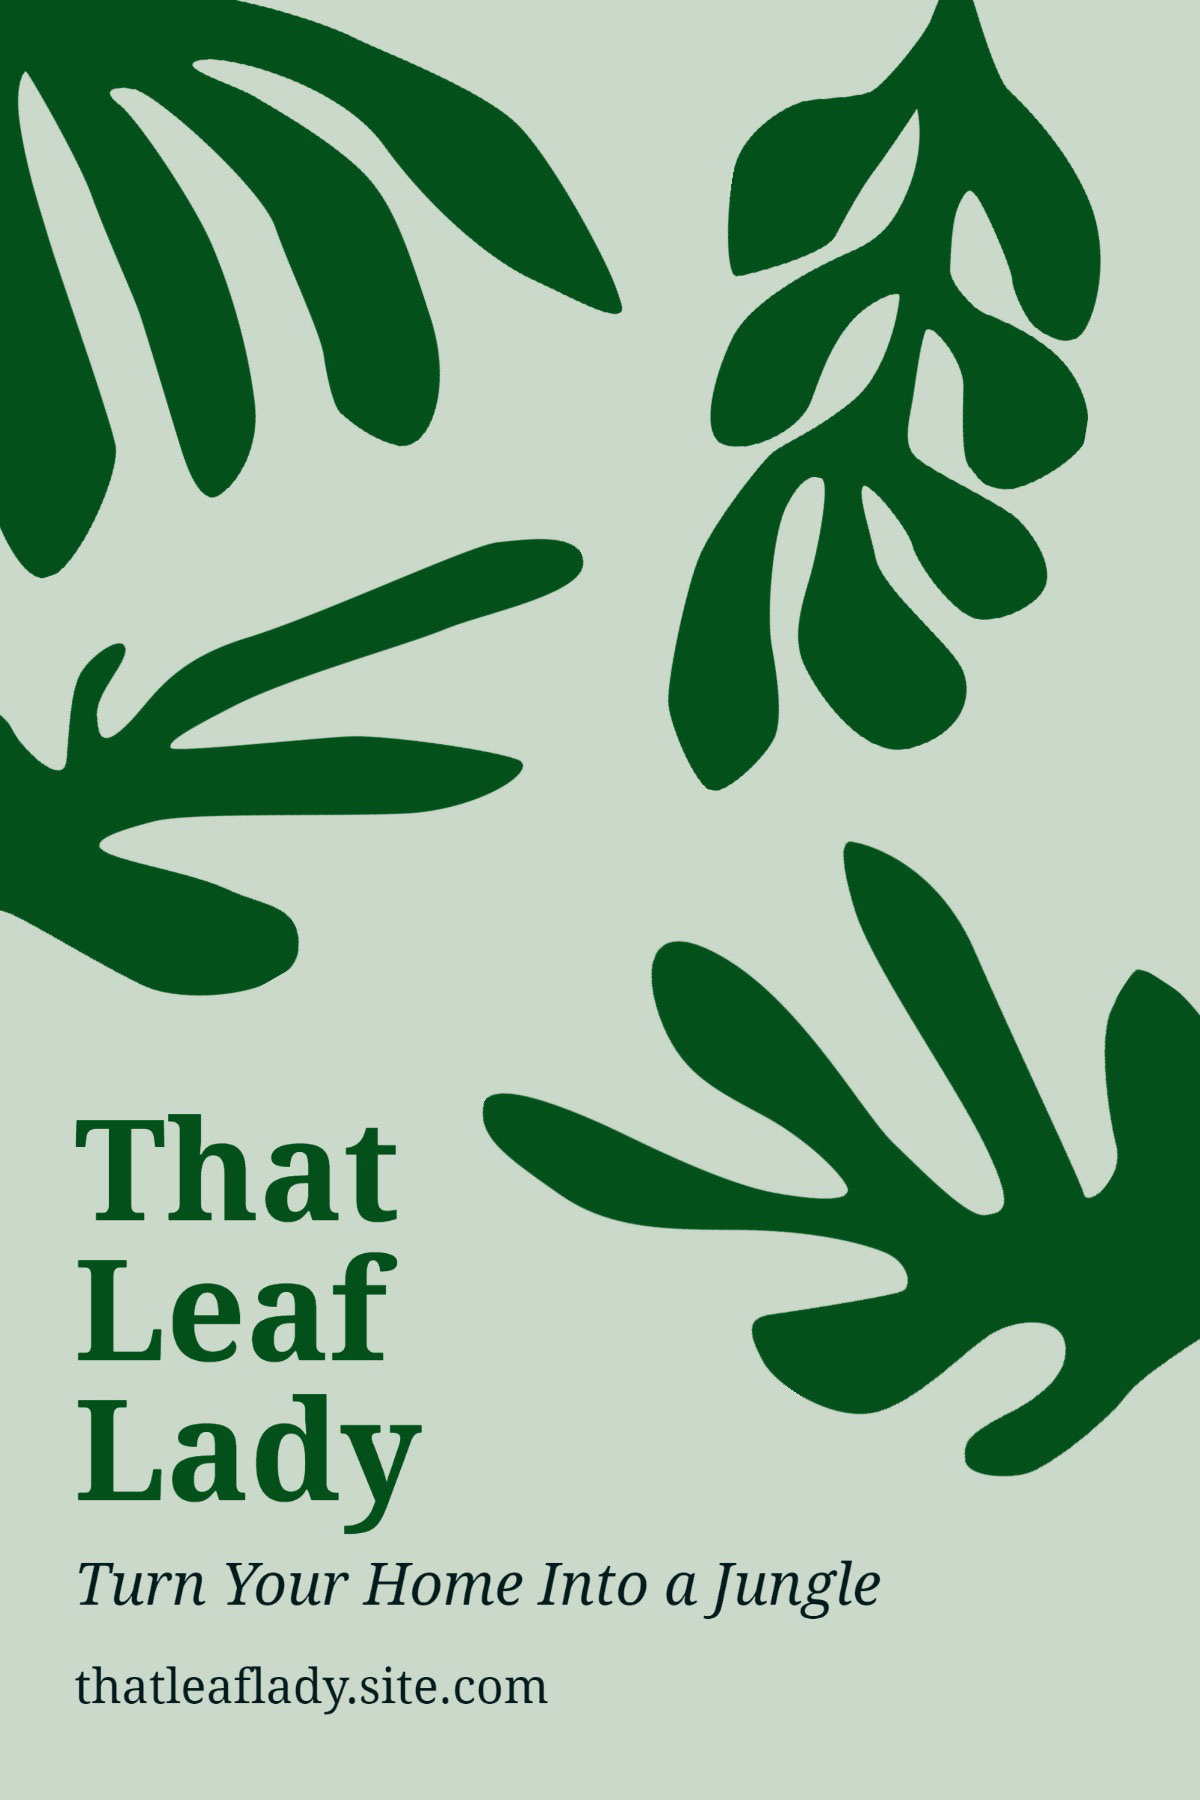 Green Plant Pinterest Post That Leaf Lady Turn Your Home Into a Jungle thatleaflady.site.com